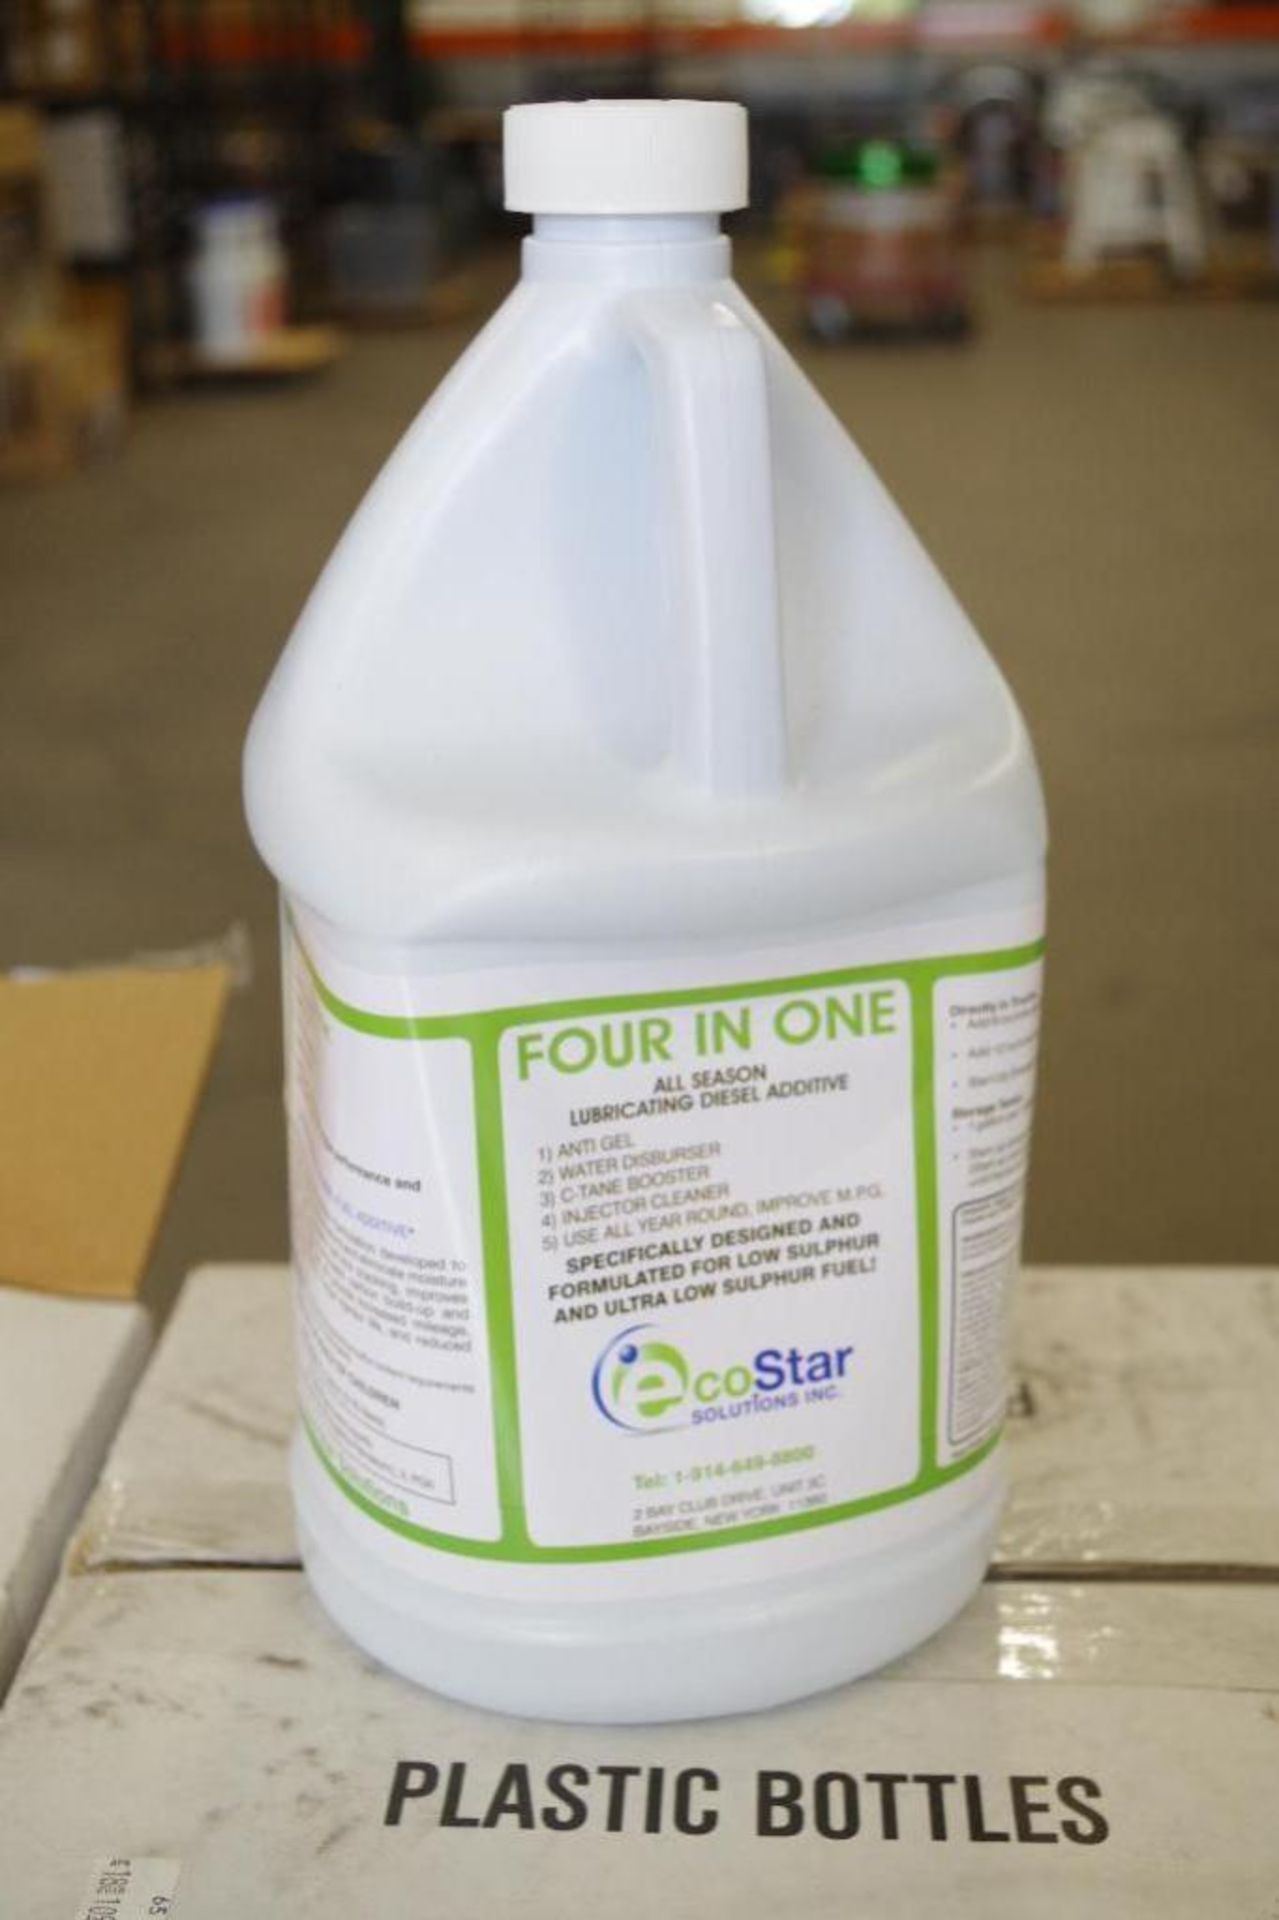 36-Gallons NEW ECOSTAR All Season 4-IN-1 Lubricating Diesel Additive - Image 2 of 6